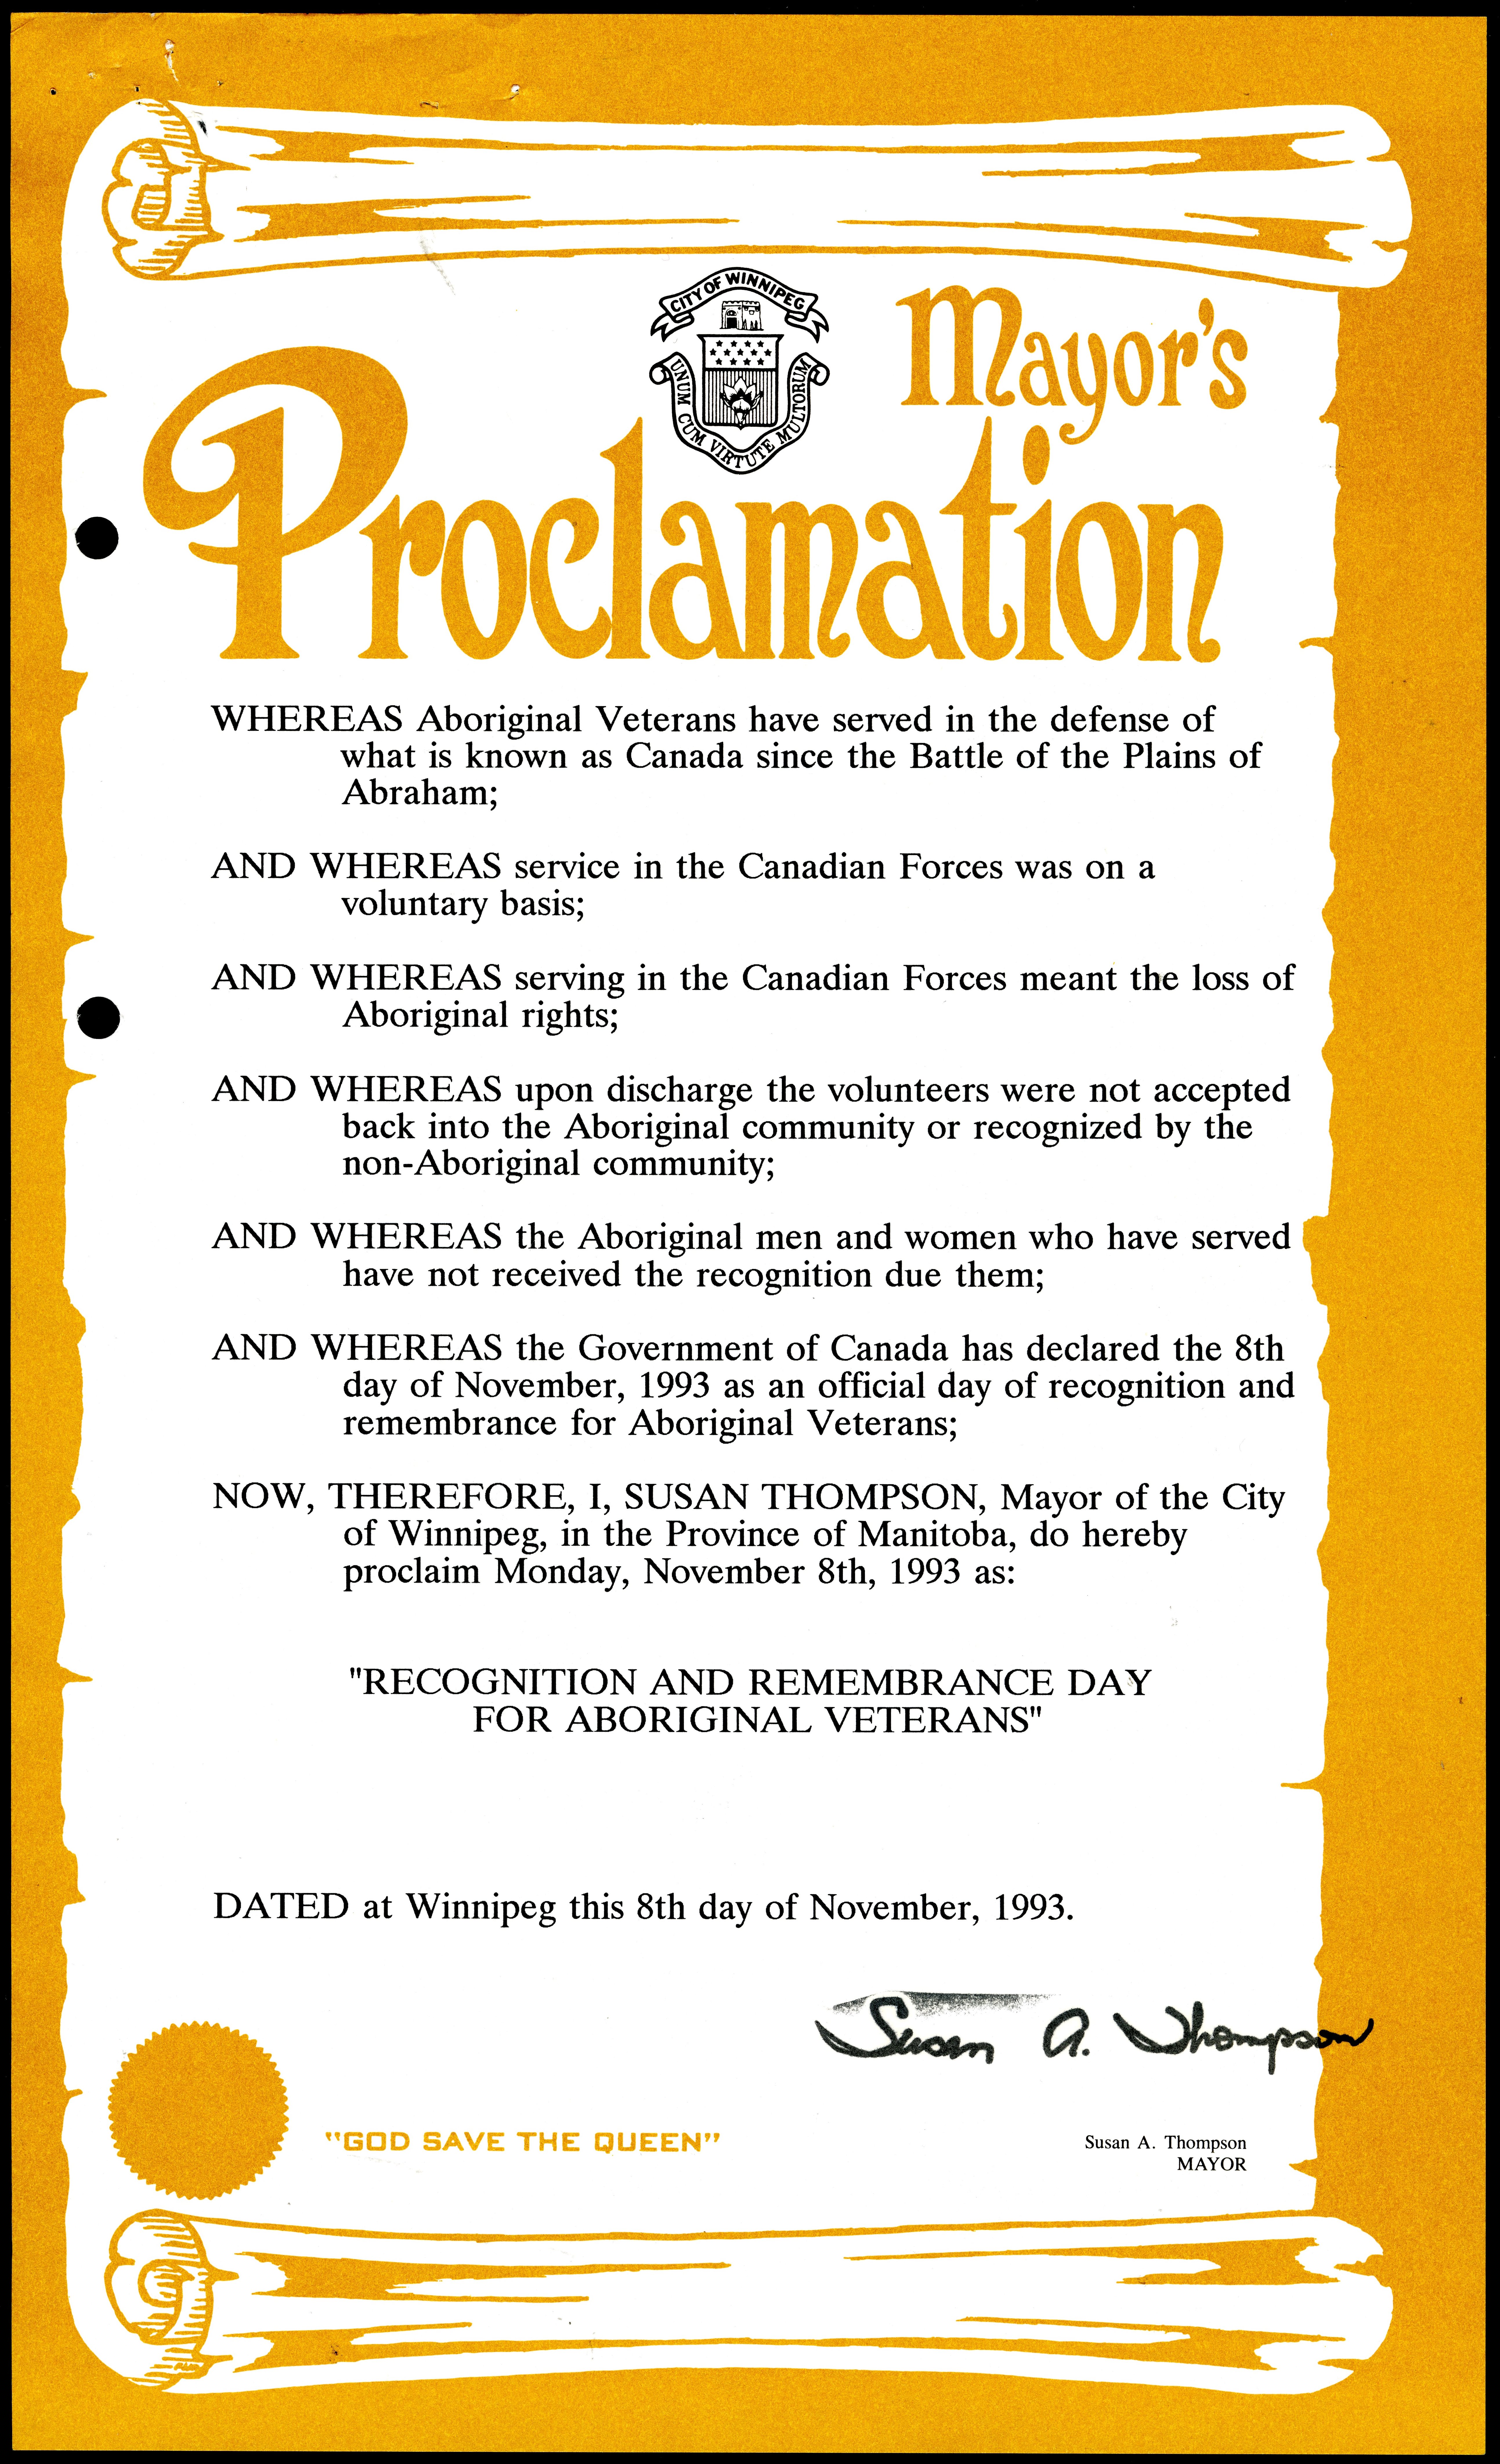 A 1993 Mayor's Proclamation announces "Recognition and Remembrance Day for Aboriginal Veterans"